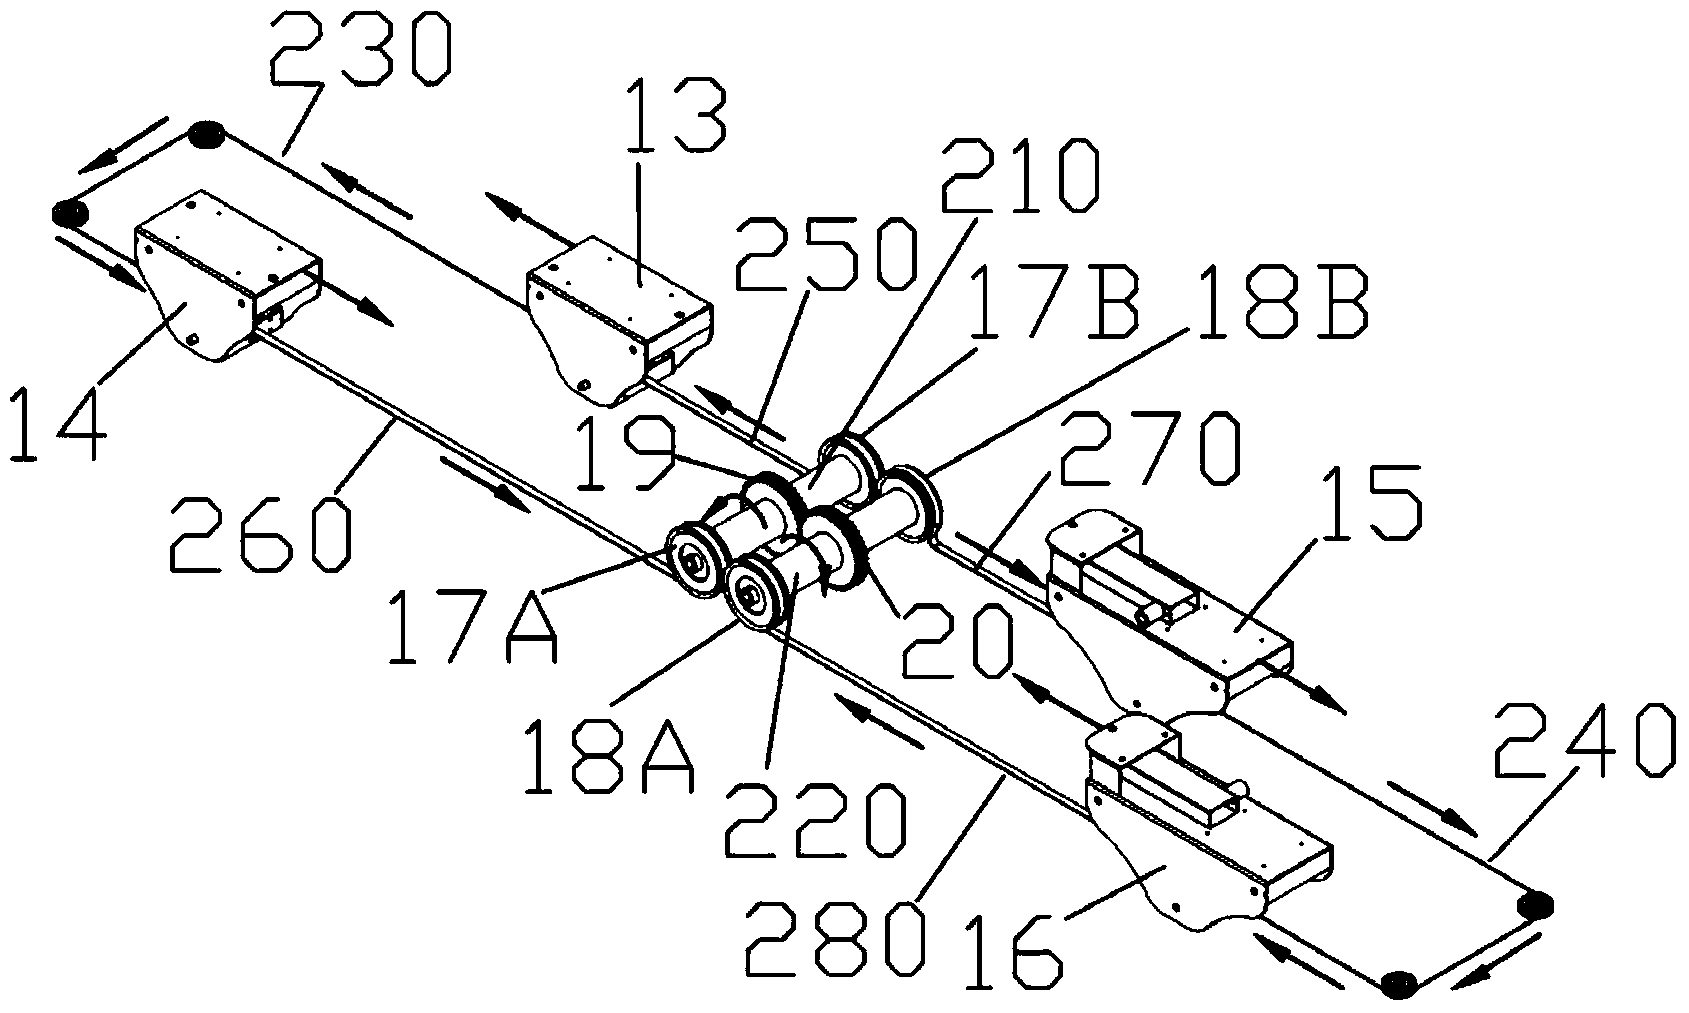 Folding-type crawling body builder with linkage mechanisms